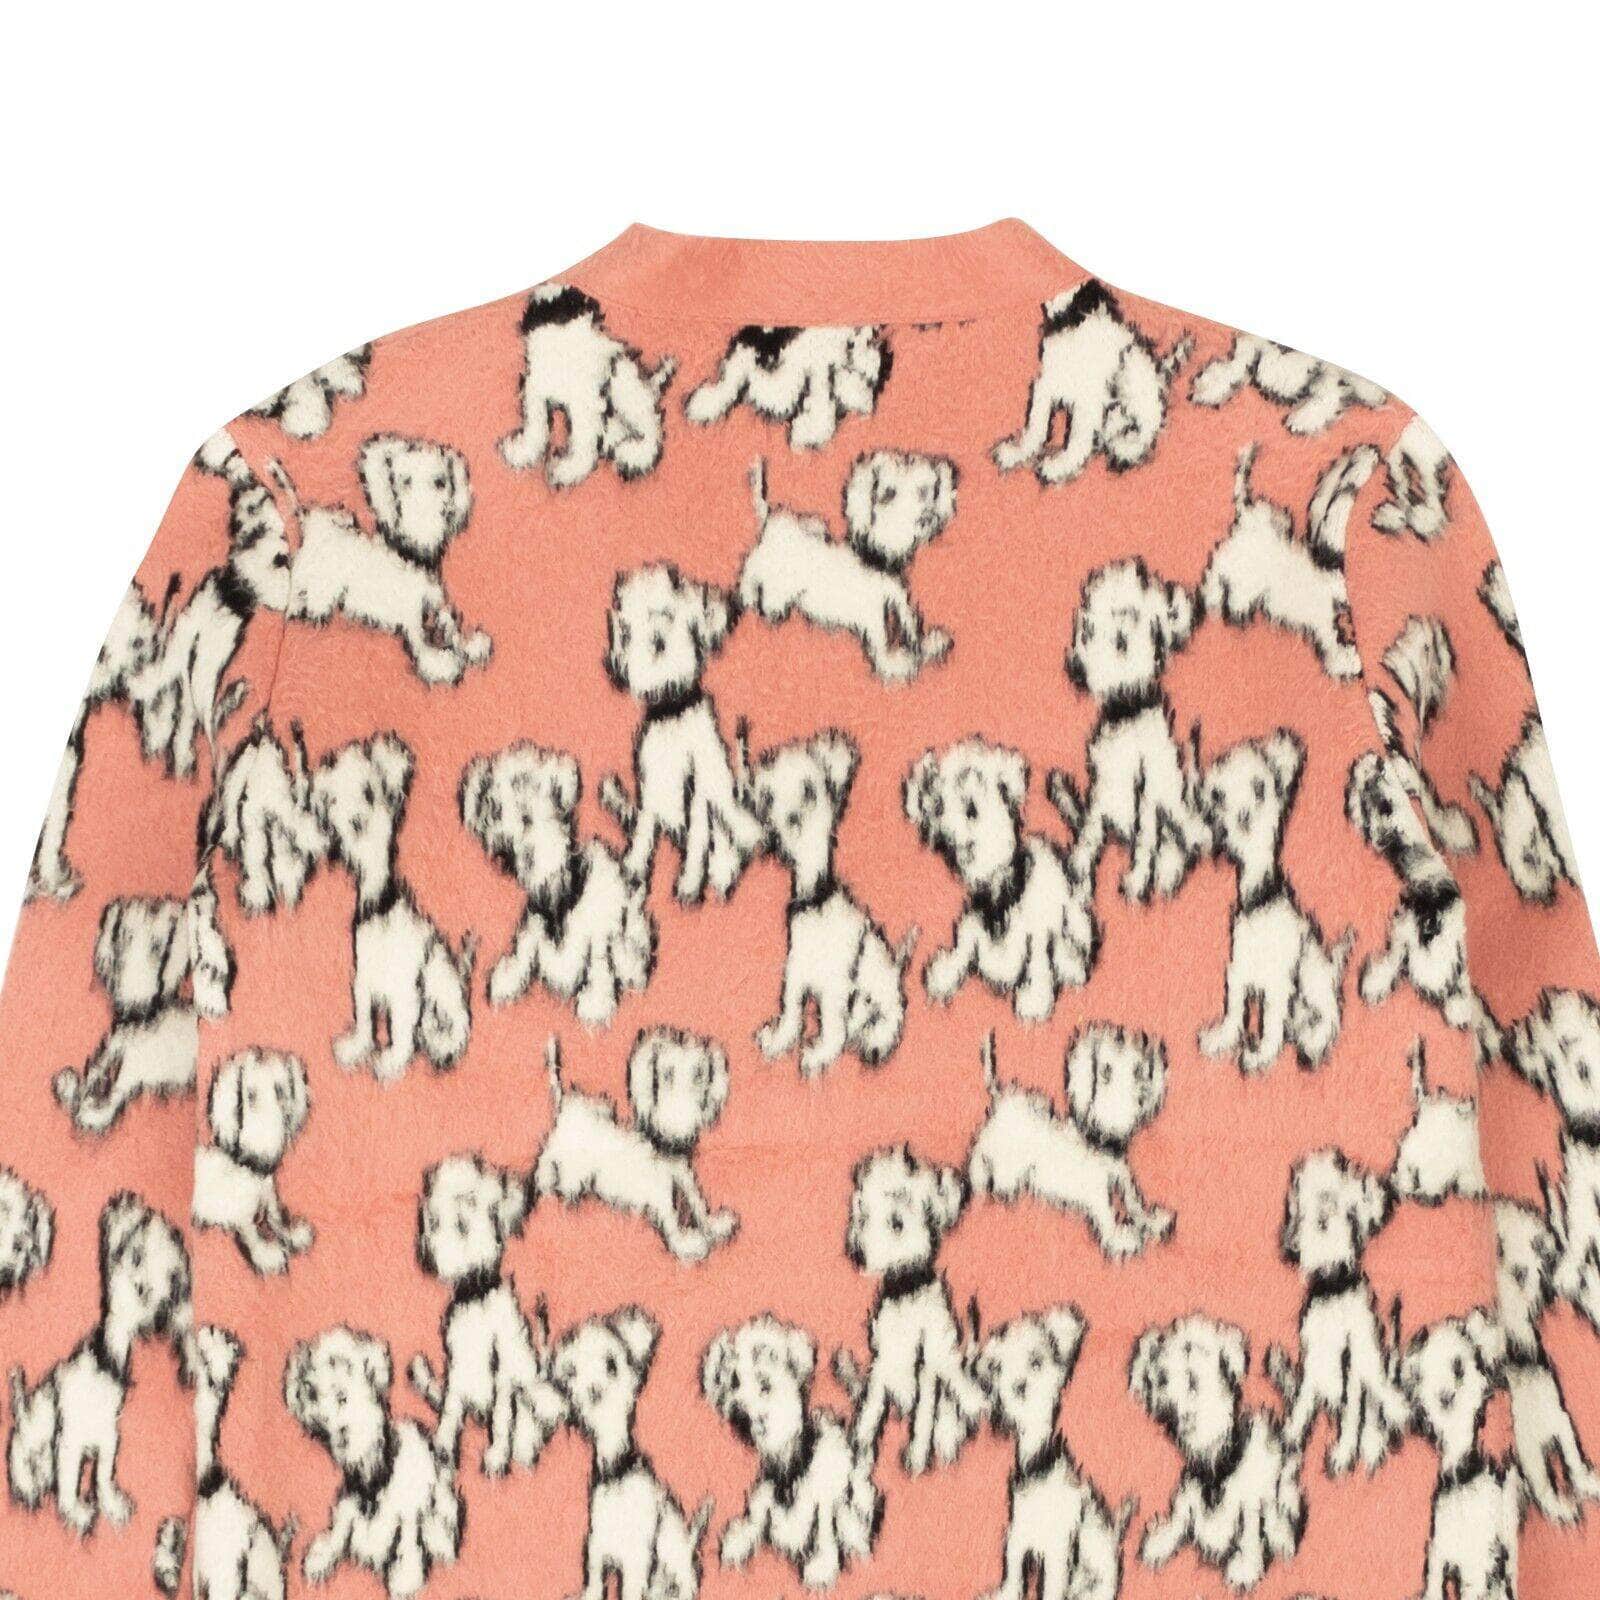 Celine 1000-2000, channelenable-all, chicmi, couponcollection, gender-mens, main-clothing, mens-shoes, size-xs XS Pink Cotton Jacquard Brain On 2020 Cardigan Sweater CLN-XTPS-0002/XS CLN-XTPS-0002/XS